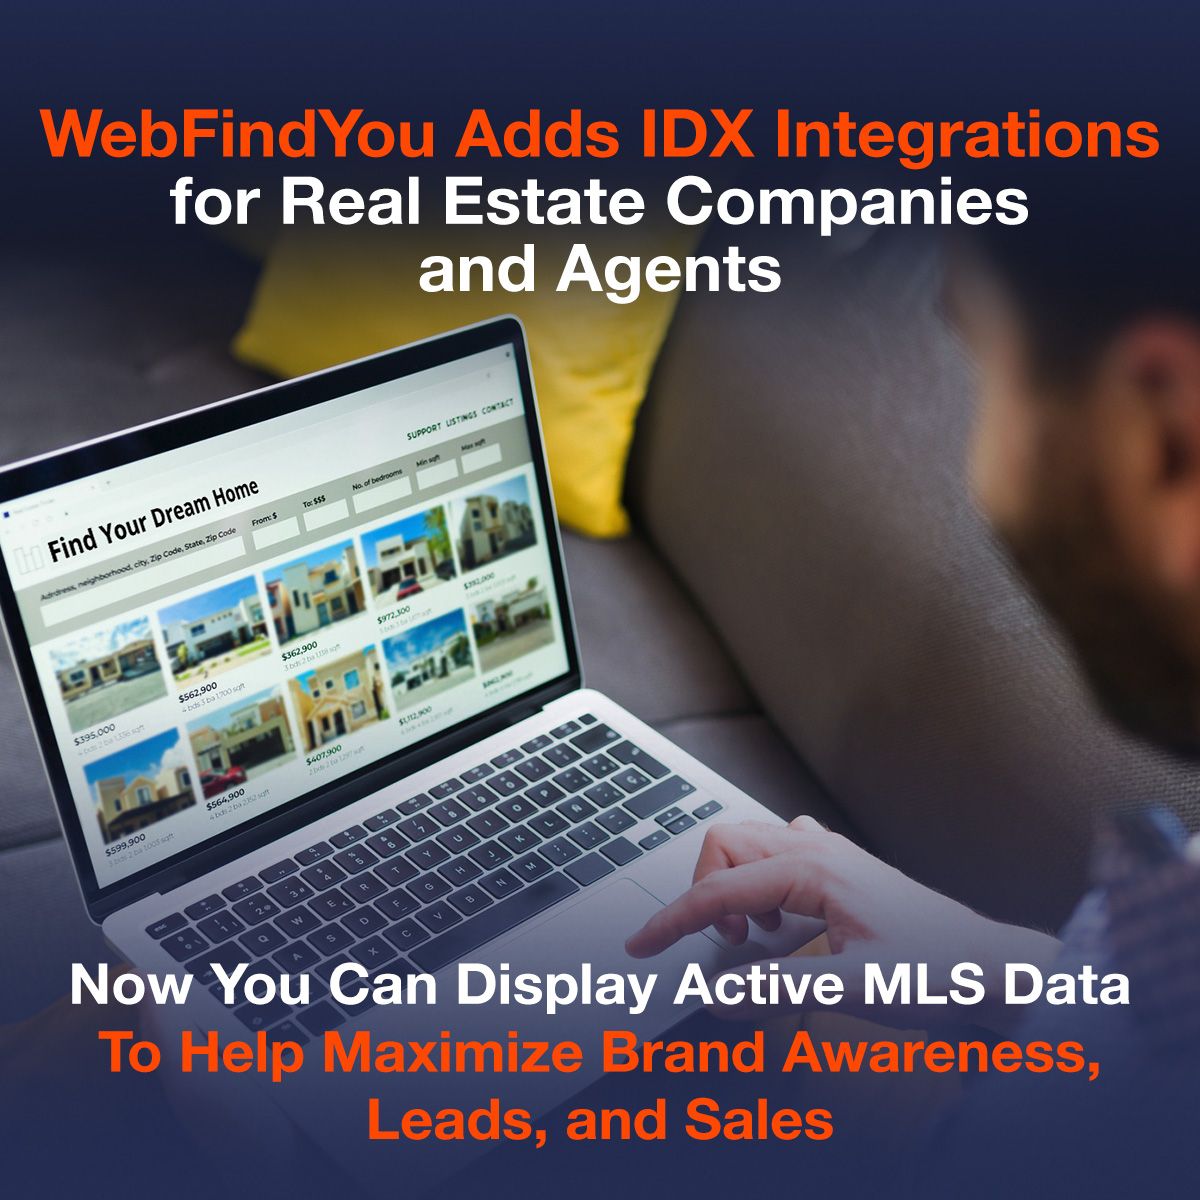 WebFindYou Adds IDX Integrations for Real Estate Companies and Agents